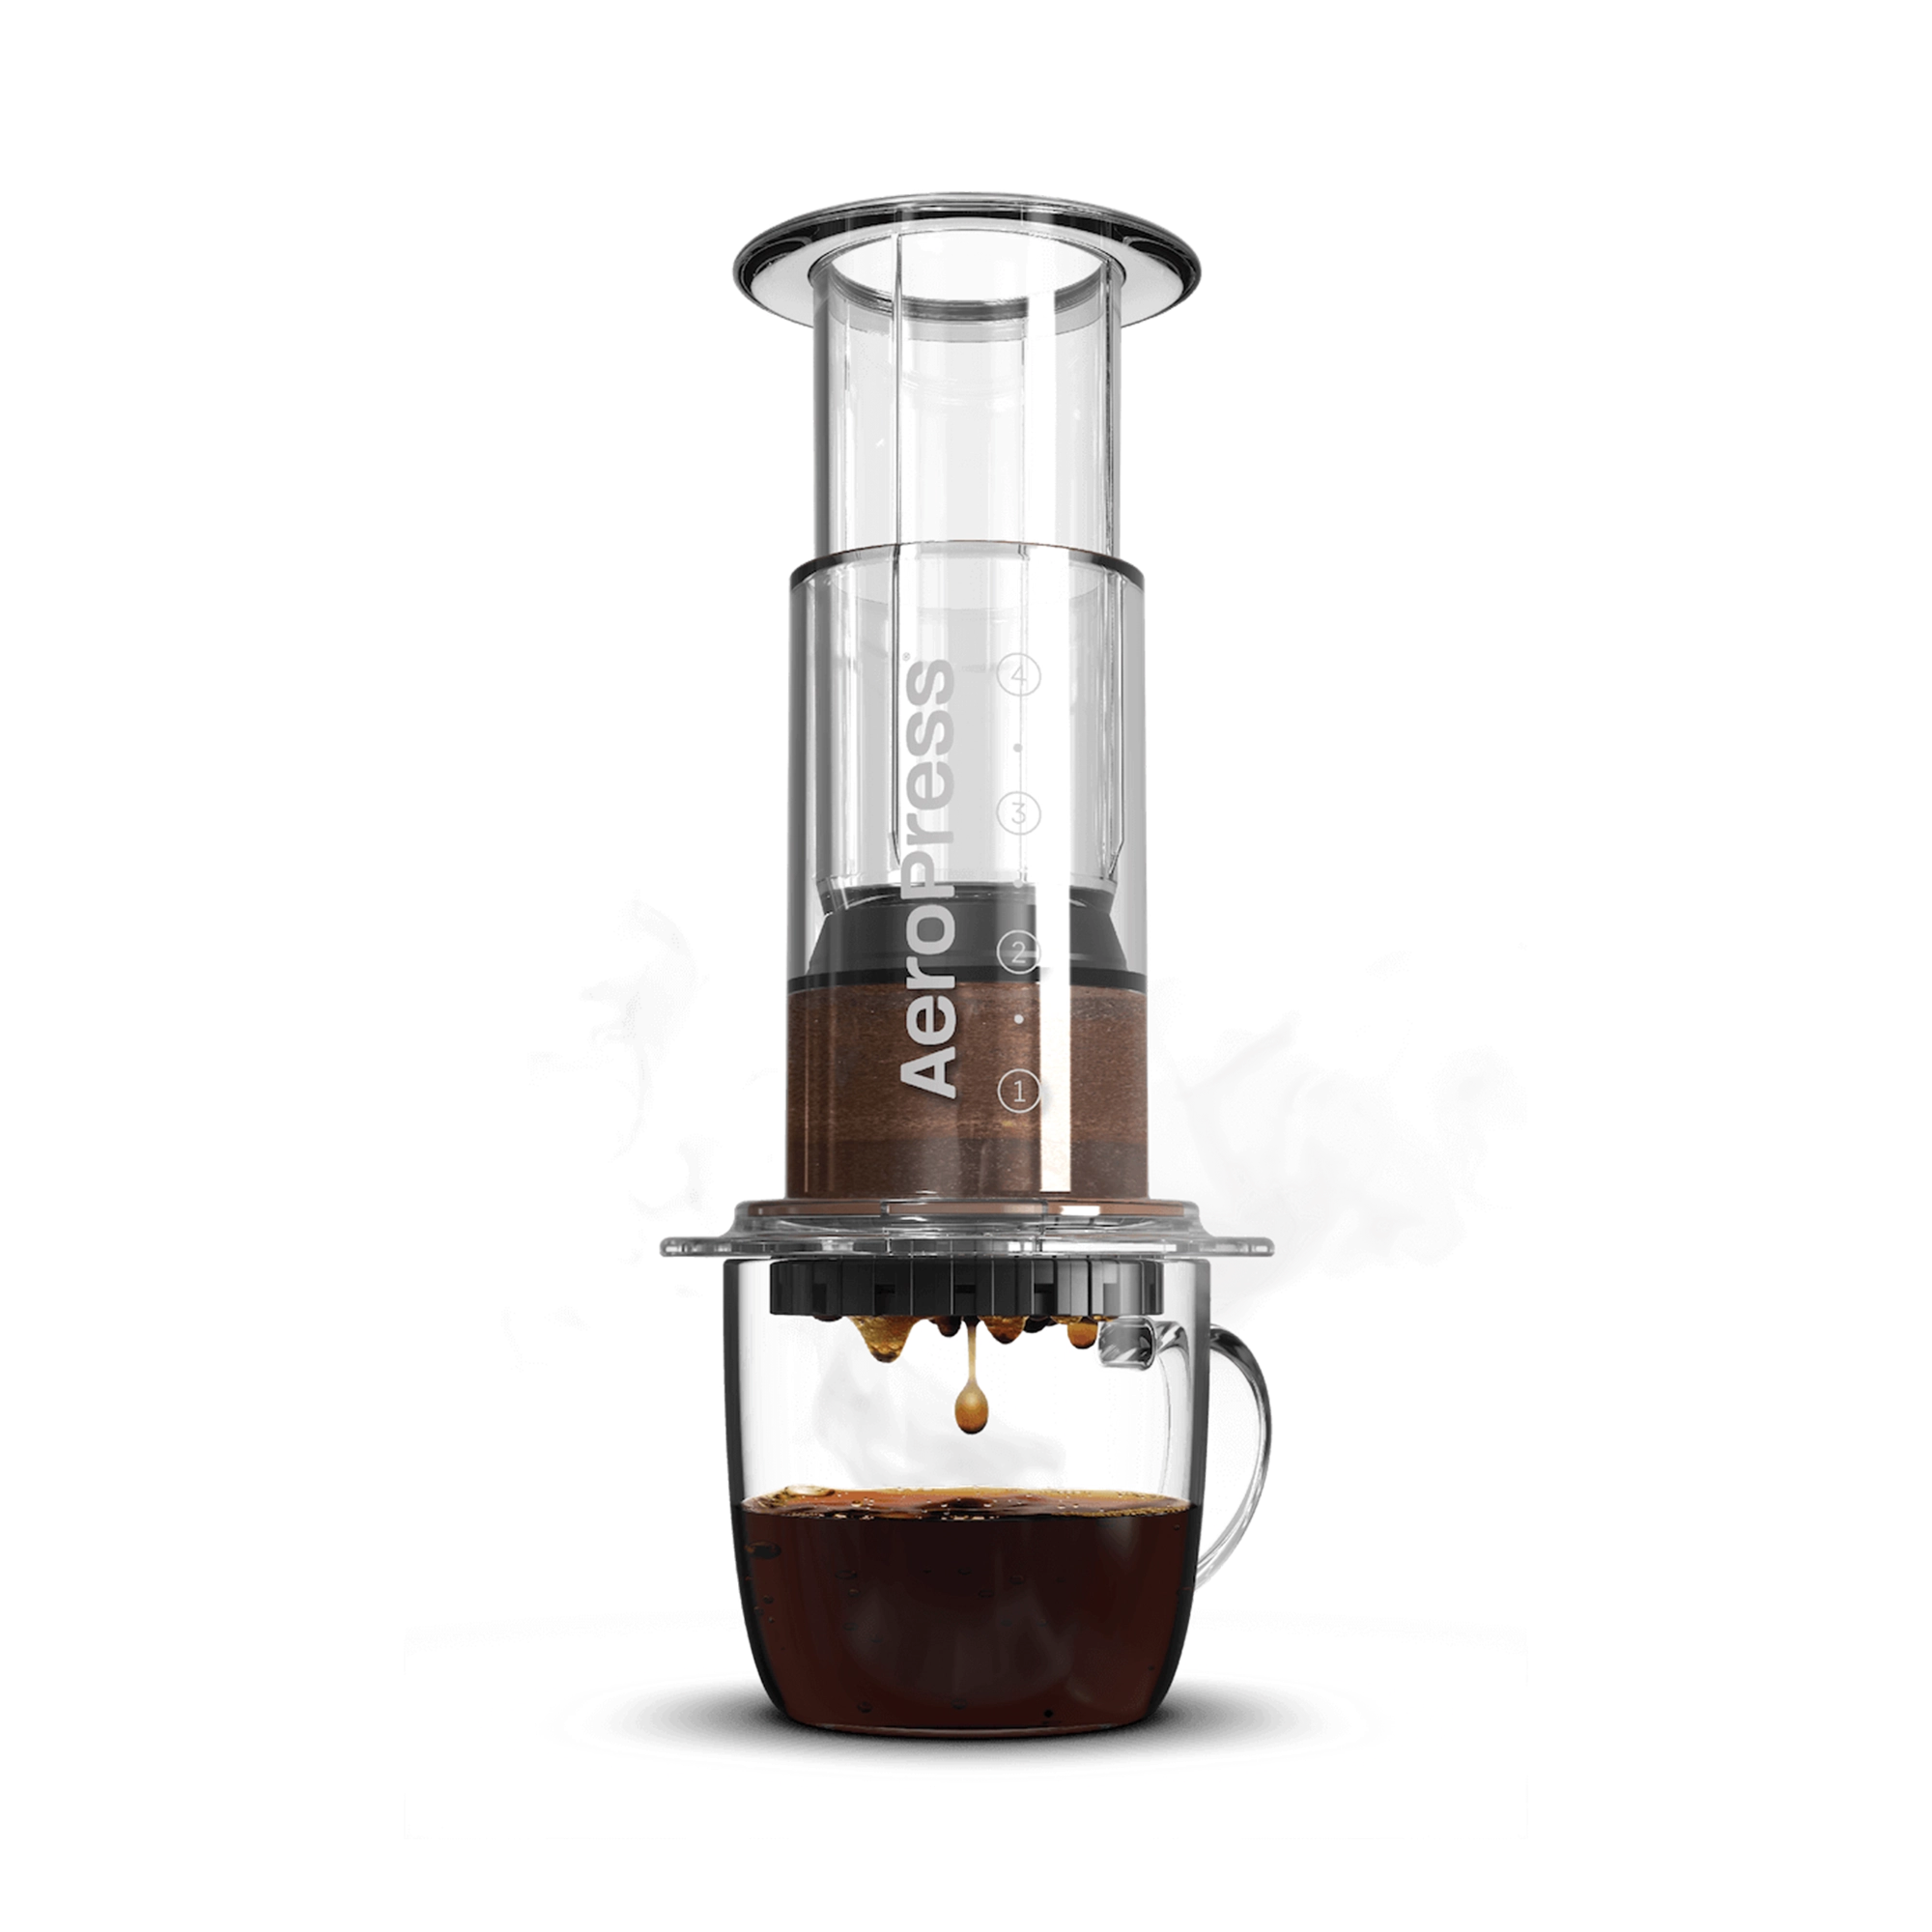 3-in-1 Coffee Press - Full Bodied Flavor Without Grit The iconic press, made with the same patented technology, now available in crystal clear, shatterproof Tritan™. Cool enough for display, tough enough for the road. 3-in-1 brew technology combines the best of several brew methods into one easy to use, very portable device. No more average joe from fancy, expensive machines. Smooth, rich, grit-free coffee with a delicious, full-bodied finish that lingers well after your last sip. Compact, durable and lightweight so you can pack it in your bag and take it on the road. No more mediocre (at best) coffee from the hotel, office, Airbnb, ski lodge, camper…